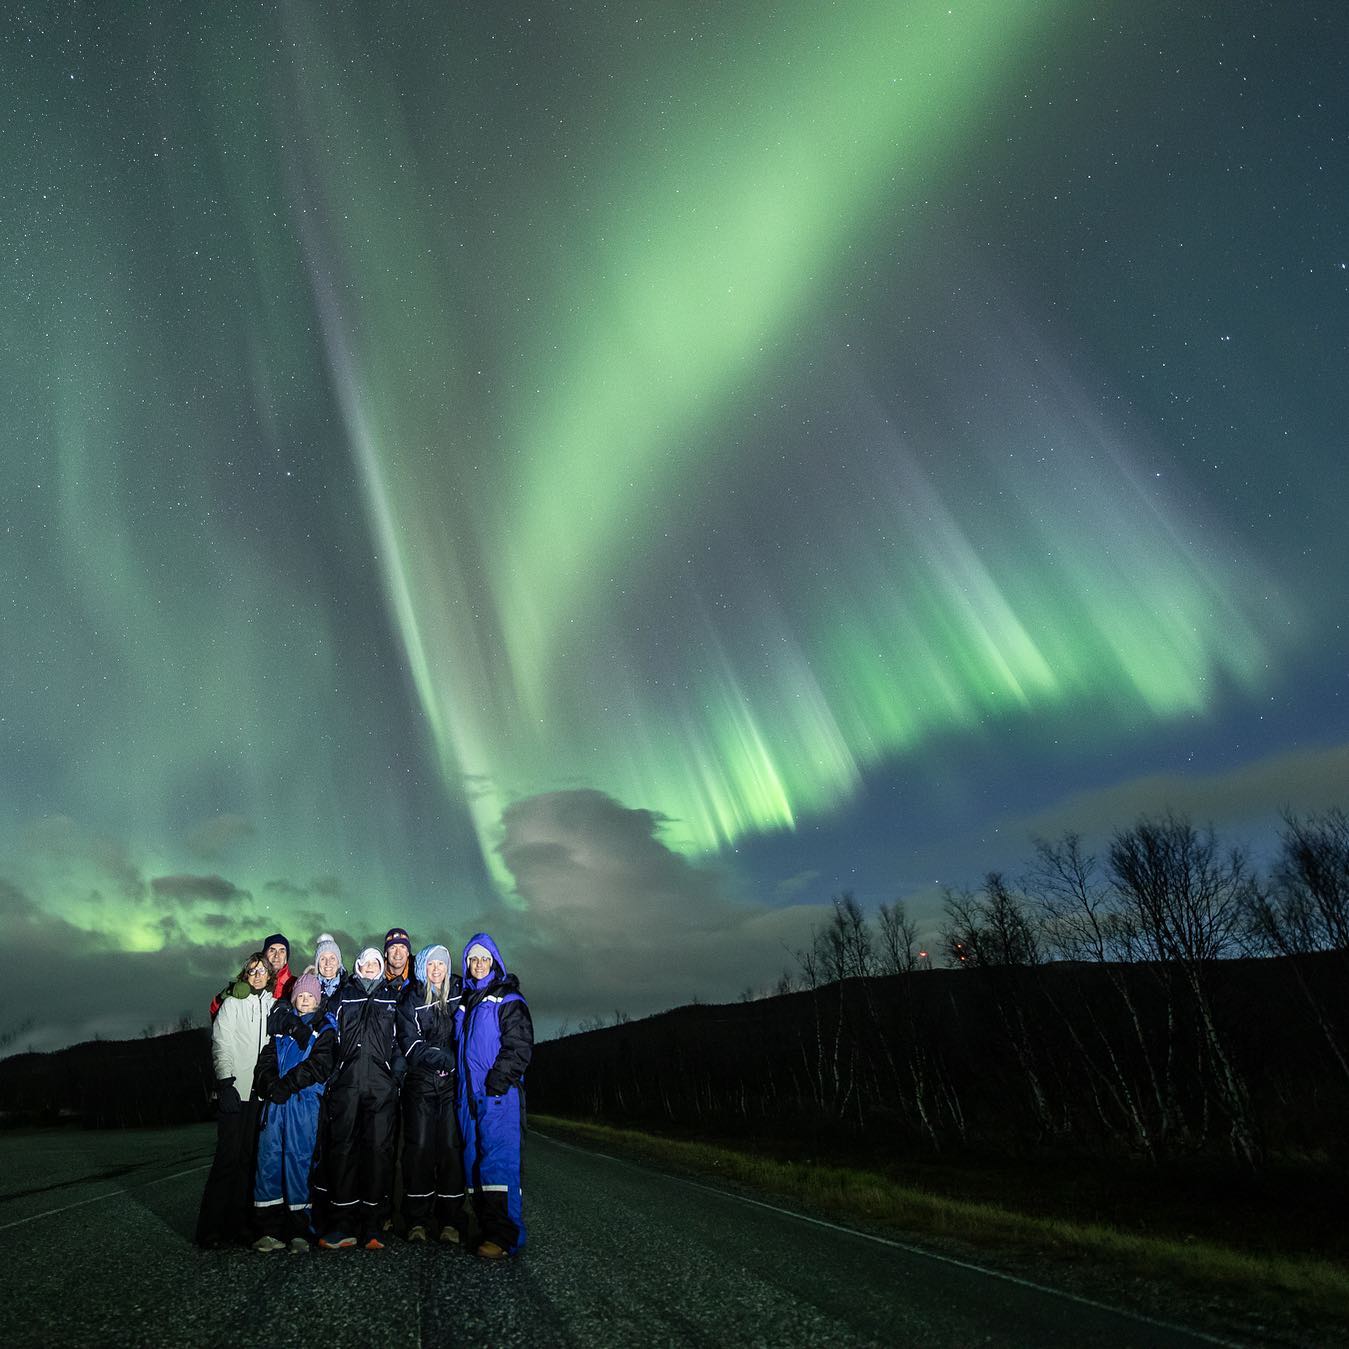 Just one very happy group of people. ❤️🌞❤️
There are only few spots left in October. If you wish to join us make sure to book ahead. 🙌
•
•
•

#tromsø #northernnorway #visittromso #northnorway2day #northernlights #tromsolove #naturephotography #lovenature #aurora #worldaurora #norge #norgefoto #worldaurora #visitnorway #auroraborealis #ig_nordnorge #canon #mittnorge #norwayphotos #auroraborealblog #norway #dreamchasersnorway #thebestofnorway #tromsomoment #ig_auroraborealis #natgeotravel #nortrip #happypeople #fullybooked